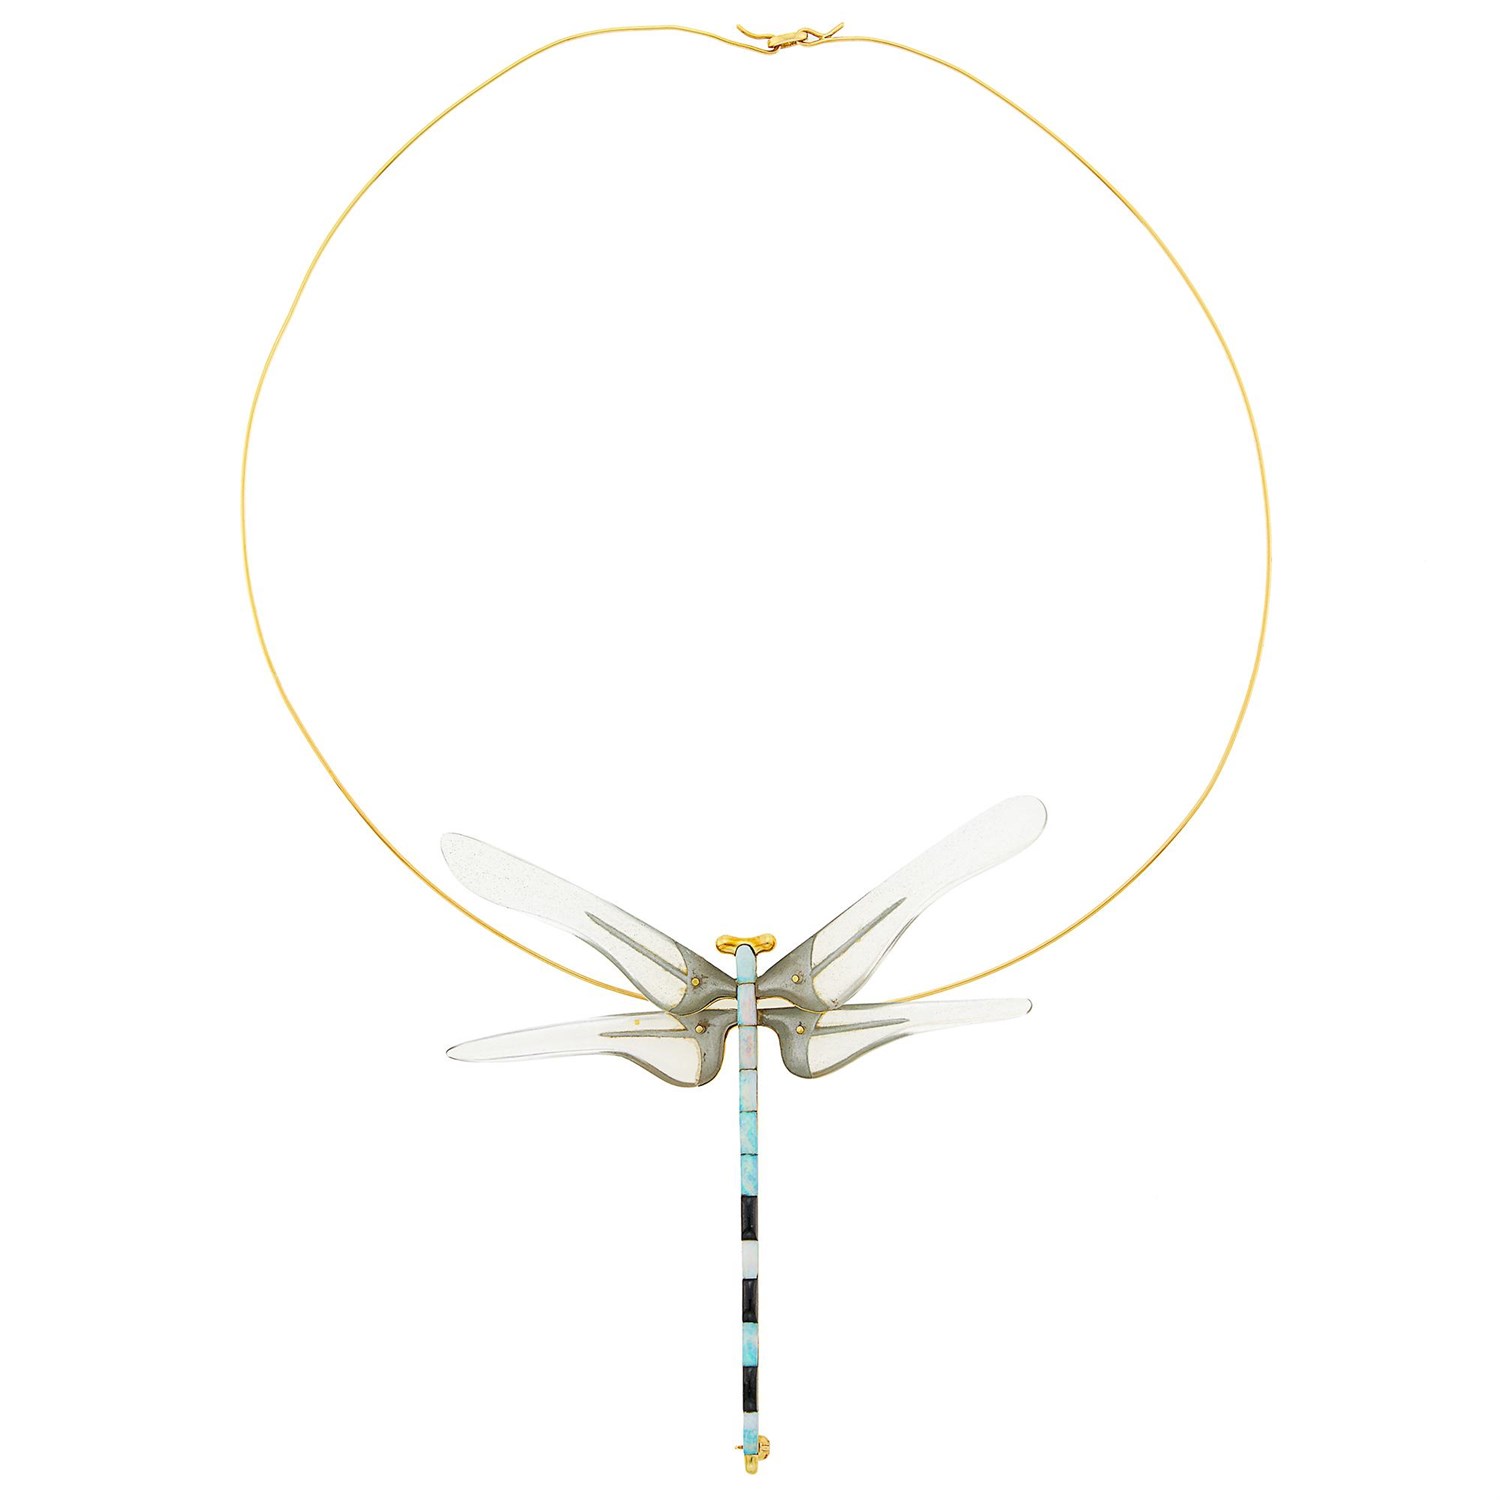 Lot 1086 - Gold, White Opal, Black Onyx and Glass Dragonfly Brooch-Pendant with Torque Wire Necklace